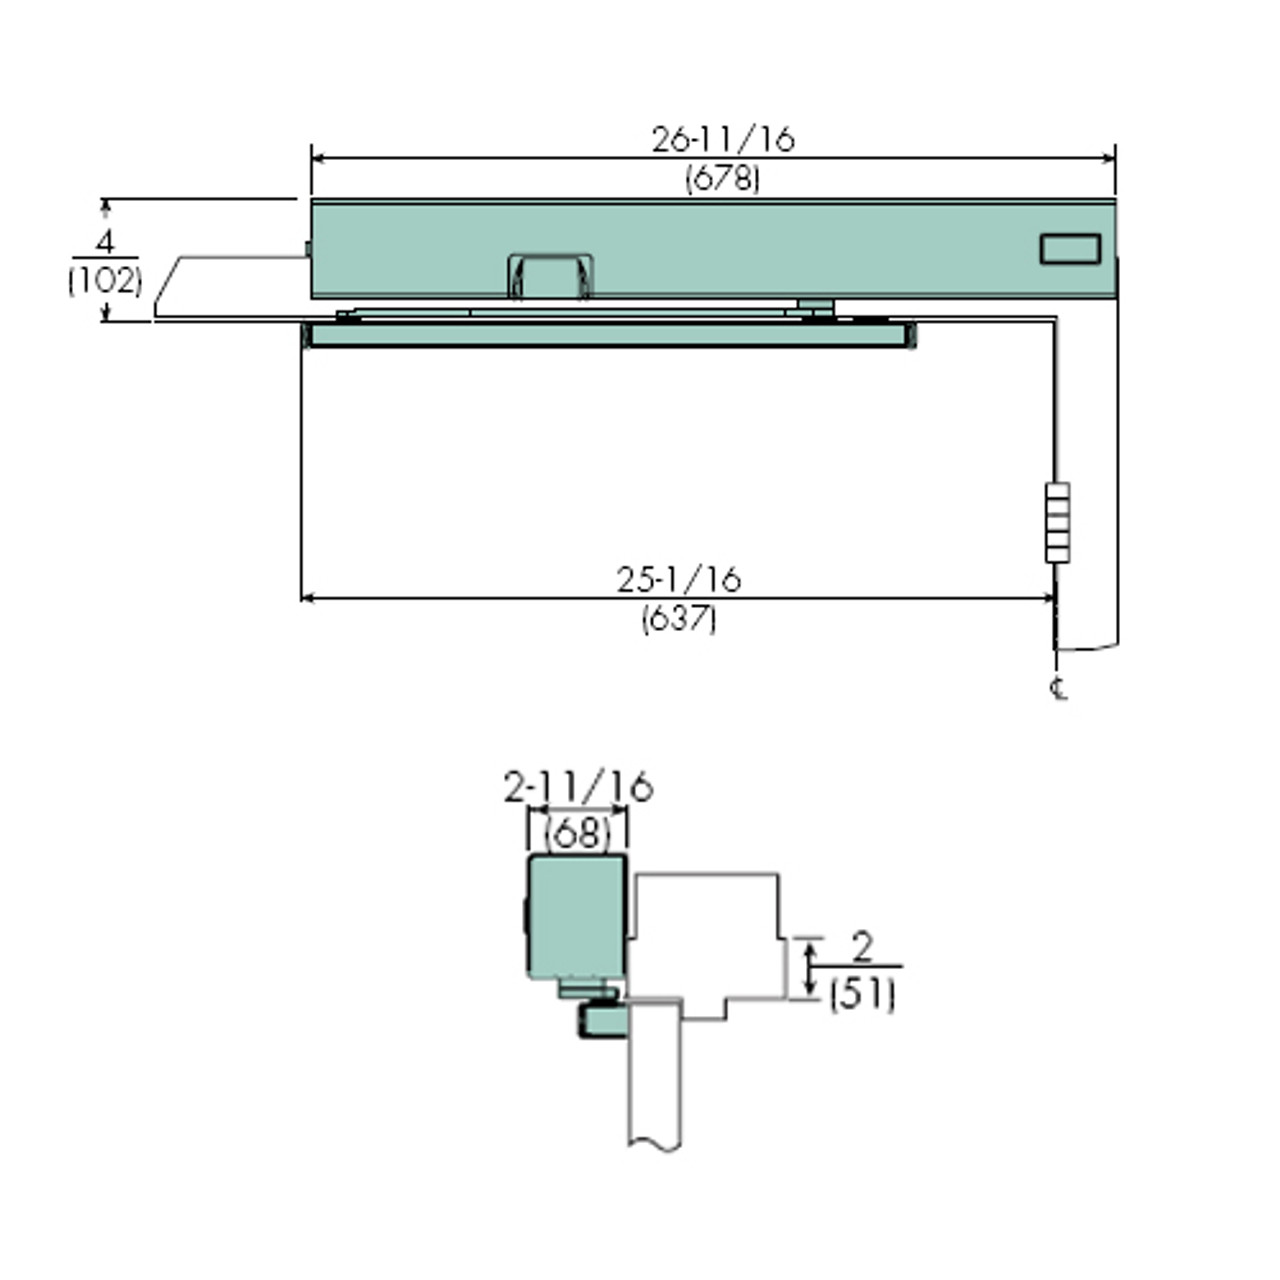 7155SZ-RH-120VAC-691 Norton 7100SZ Series Safe Zone Multi-Point Closer/Holder with Motion Sensor and Pull Side Double Egress Arm and Slide Track in Dull Bronze Finish